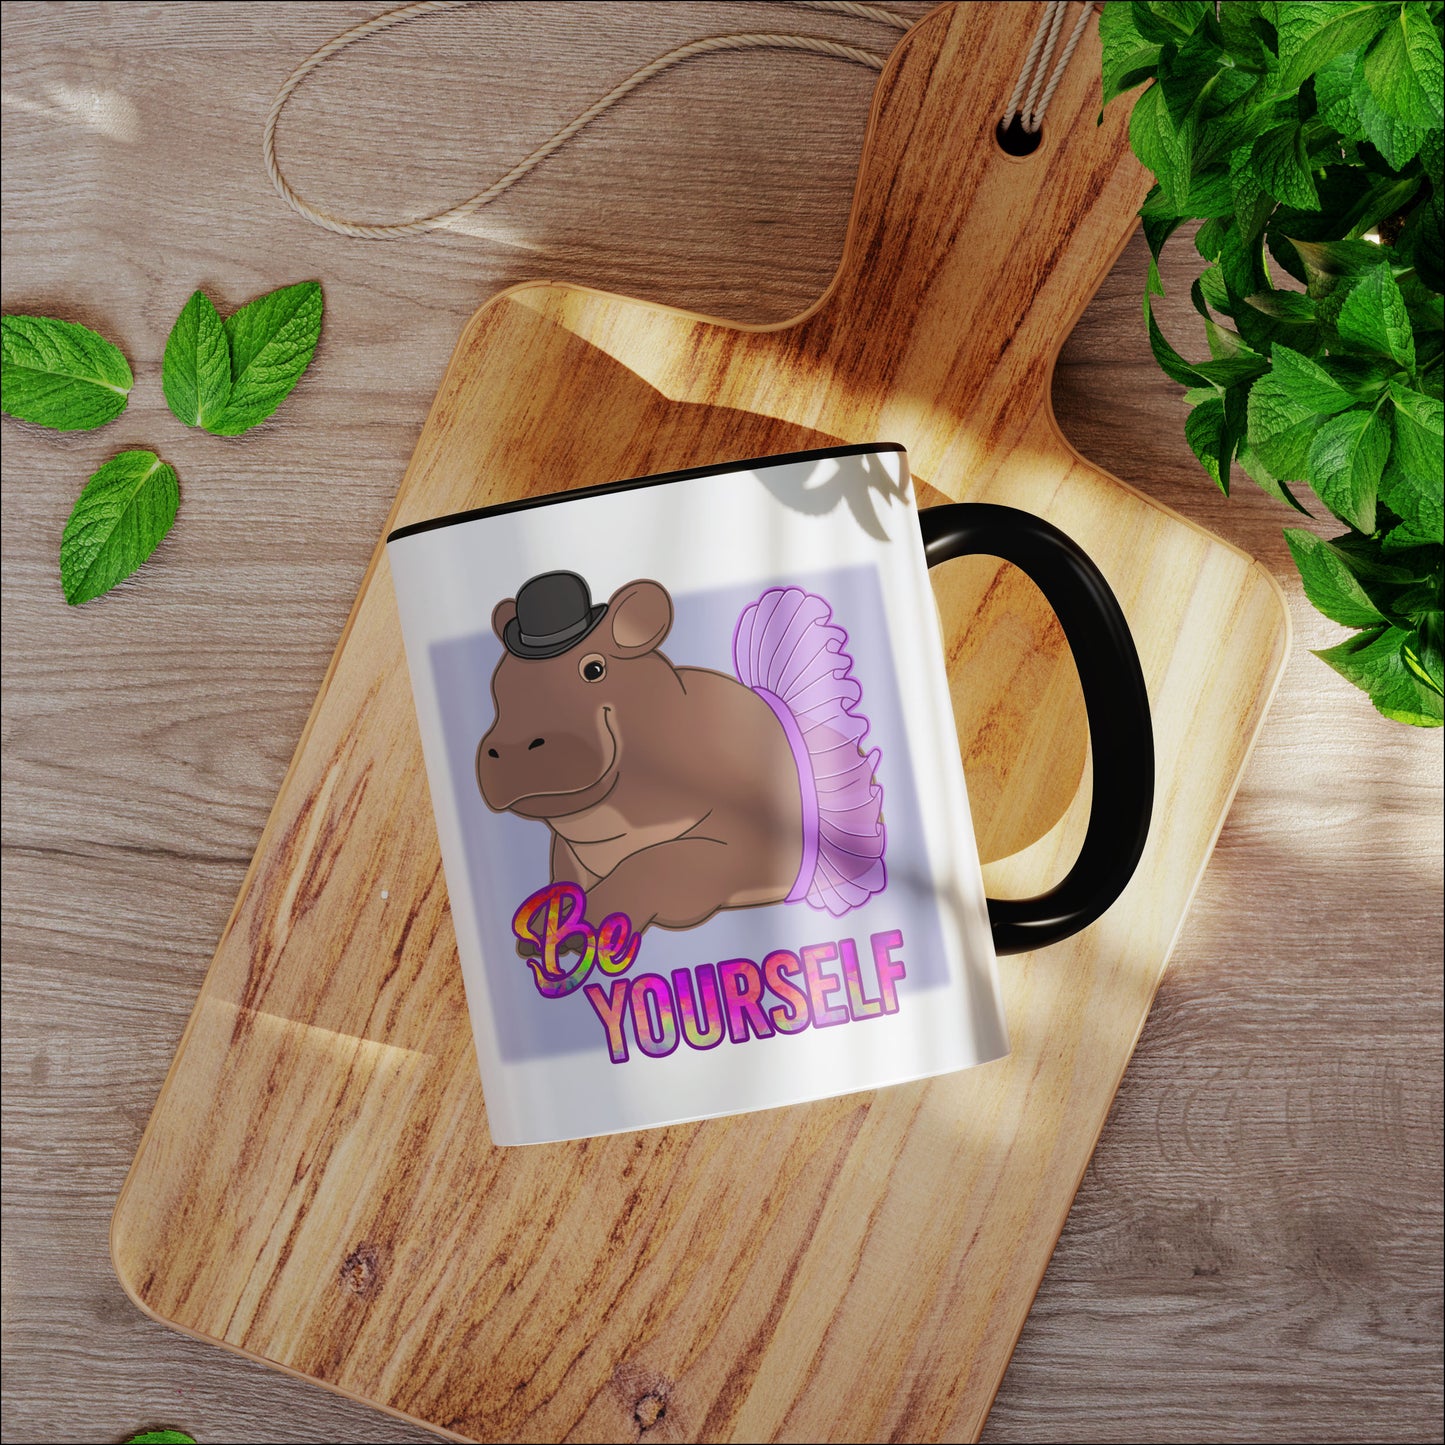 Dash Be Yourself Mug in two sizes